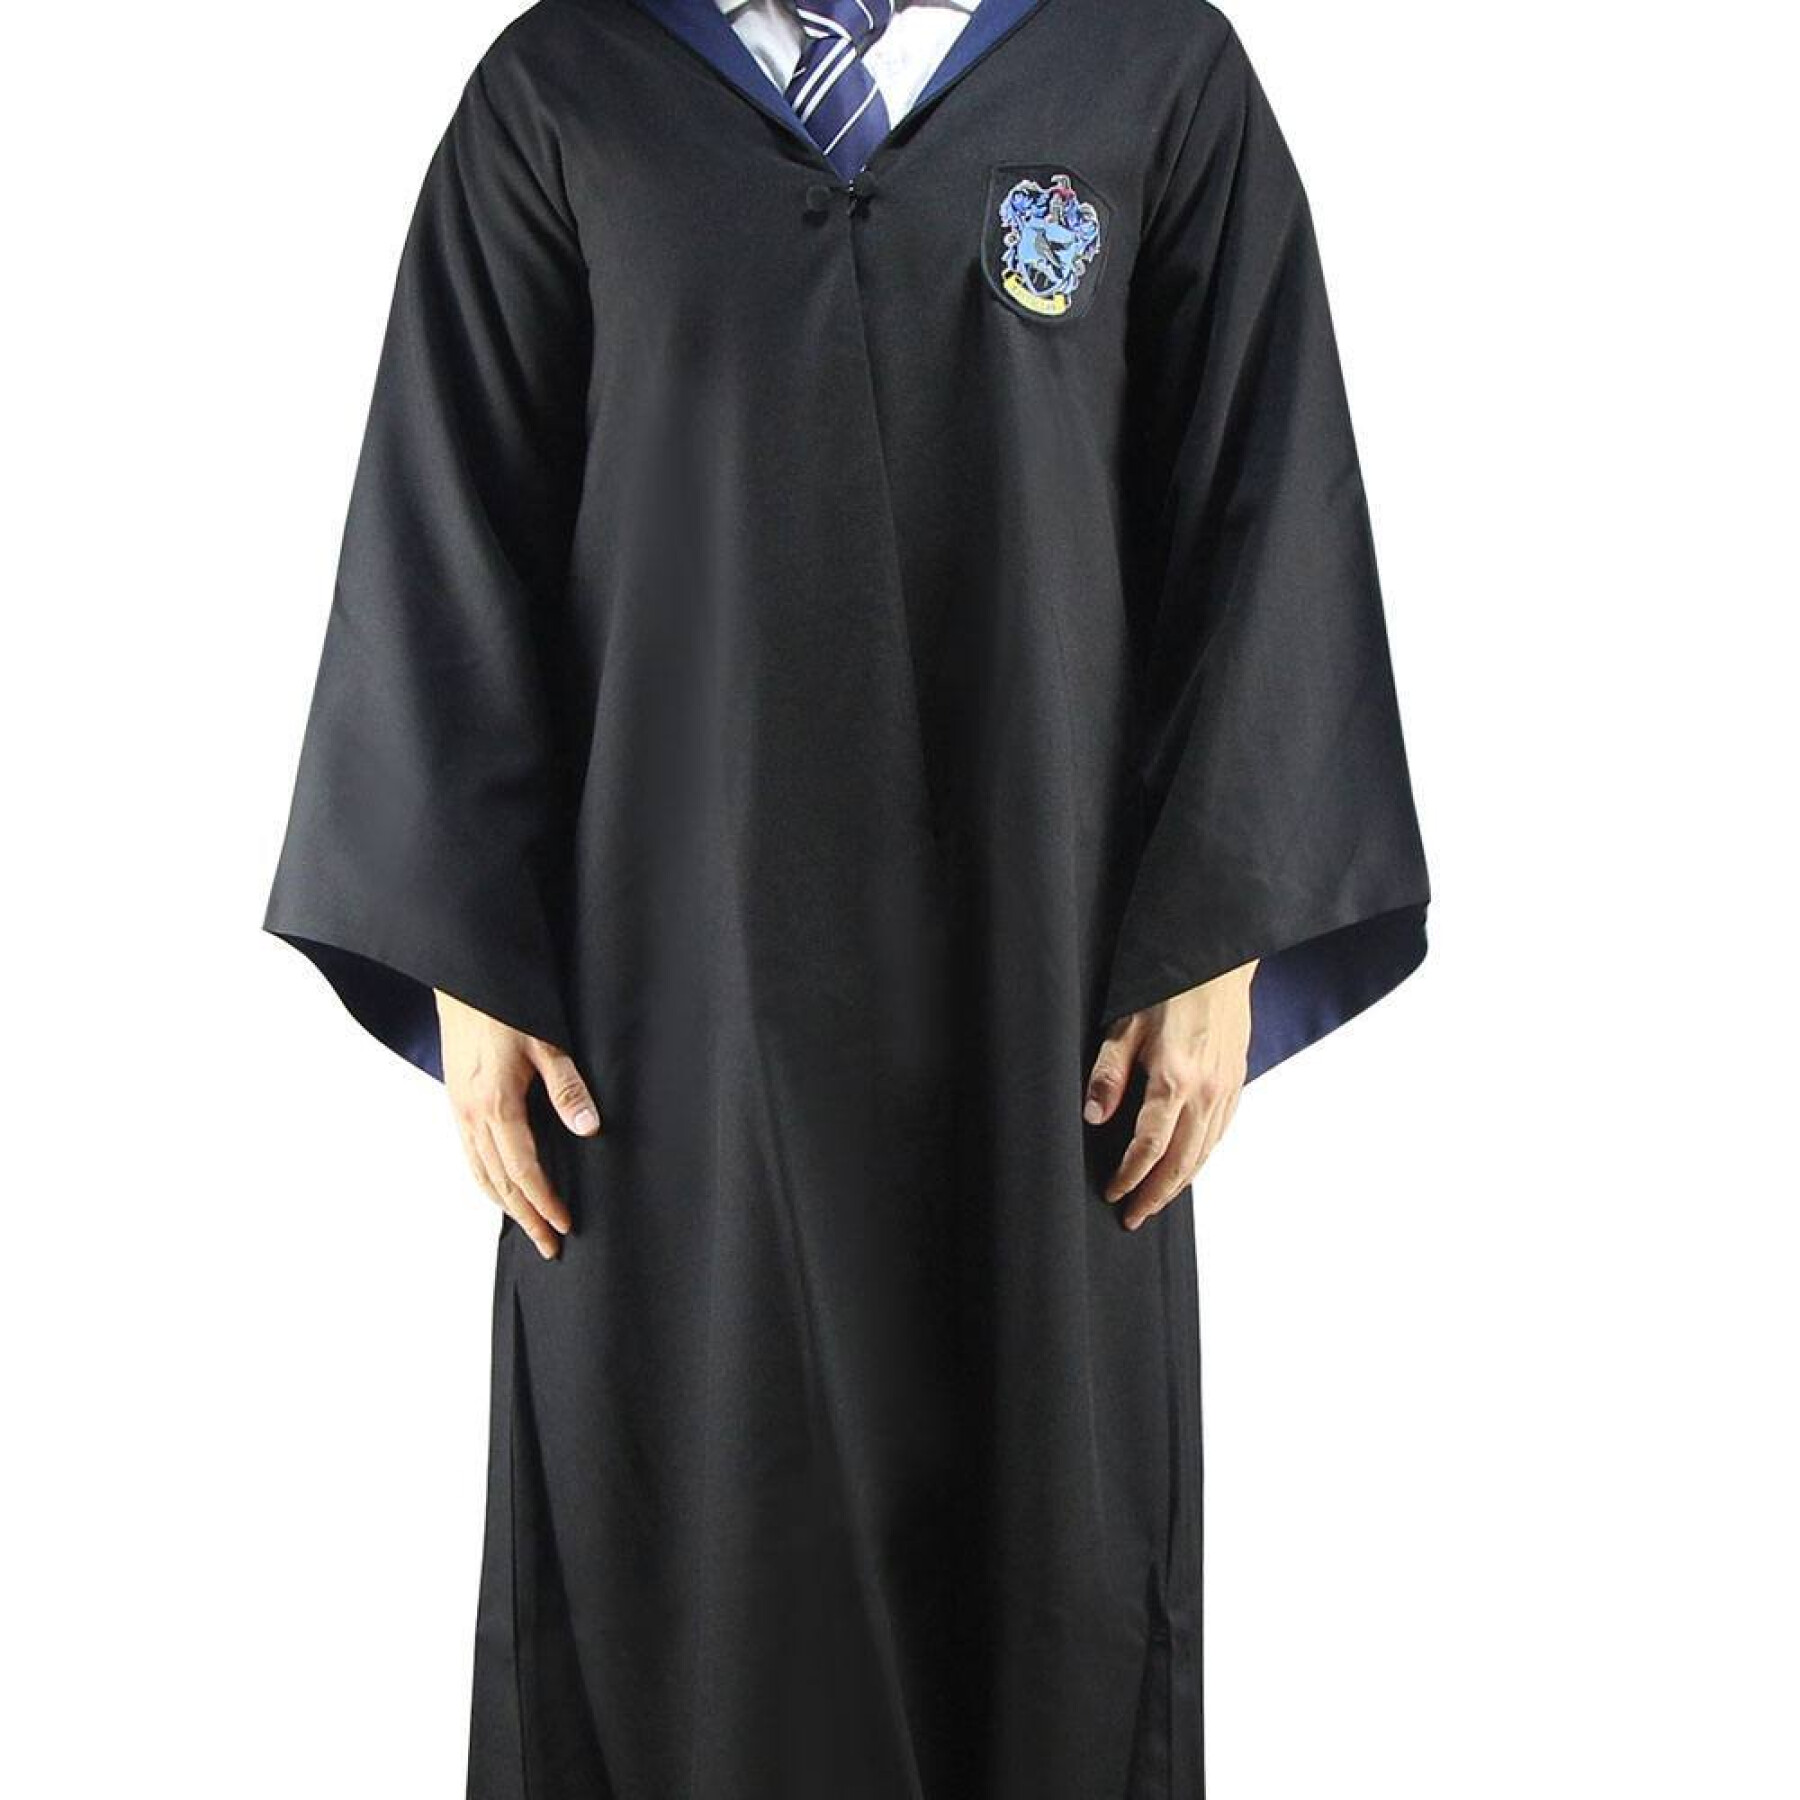 Witch dress disguise Cinereplicas Harry Potter Ravenclaw